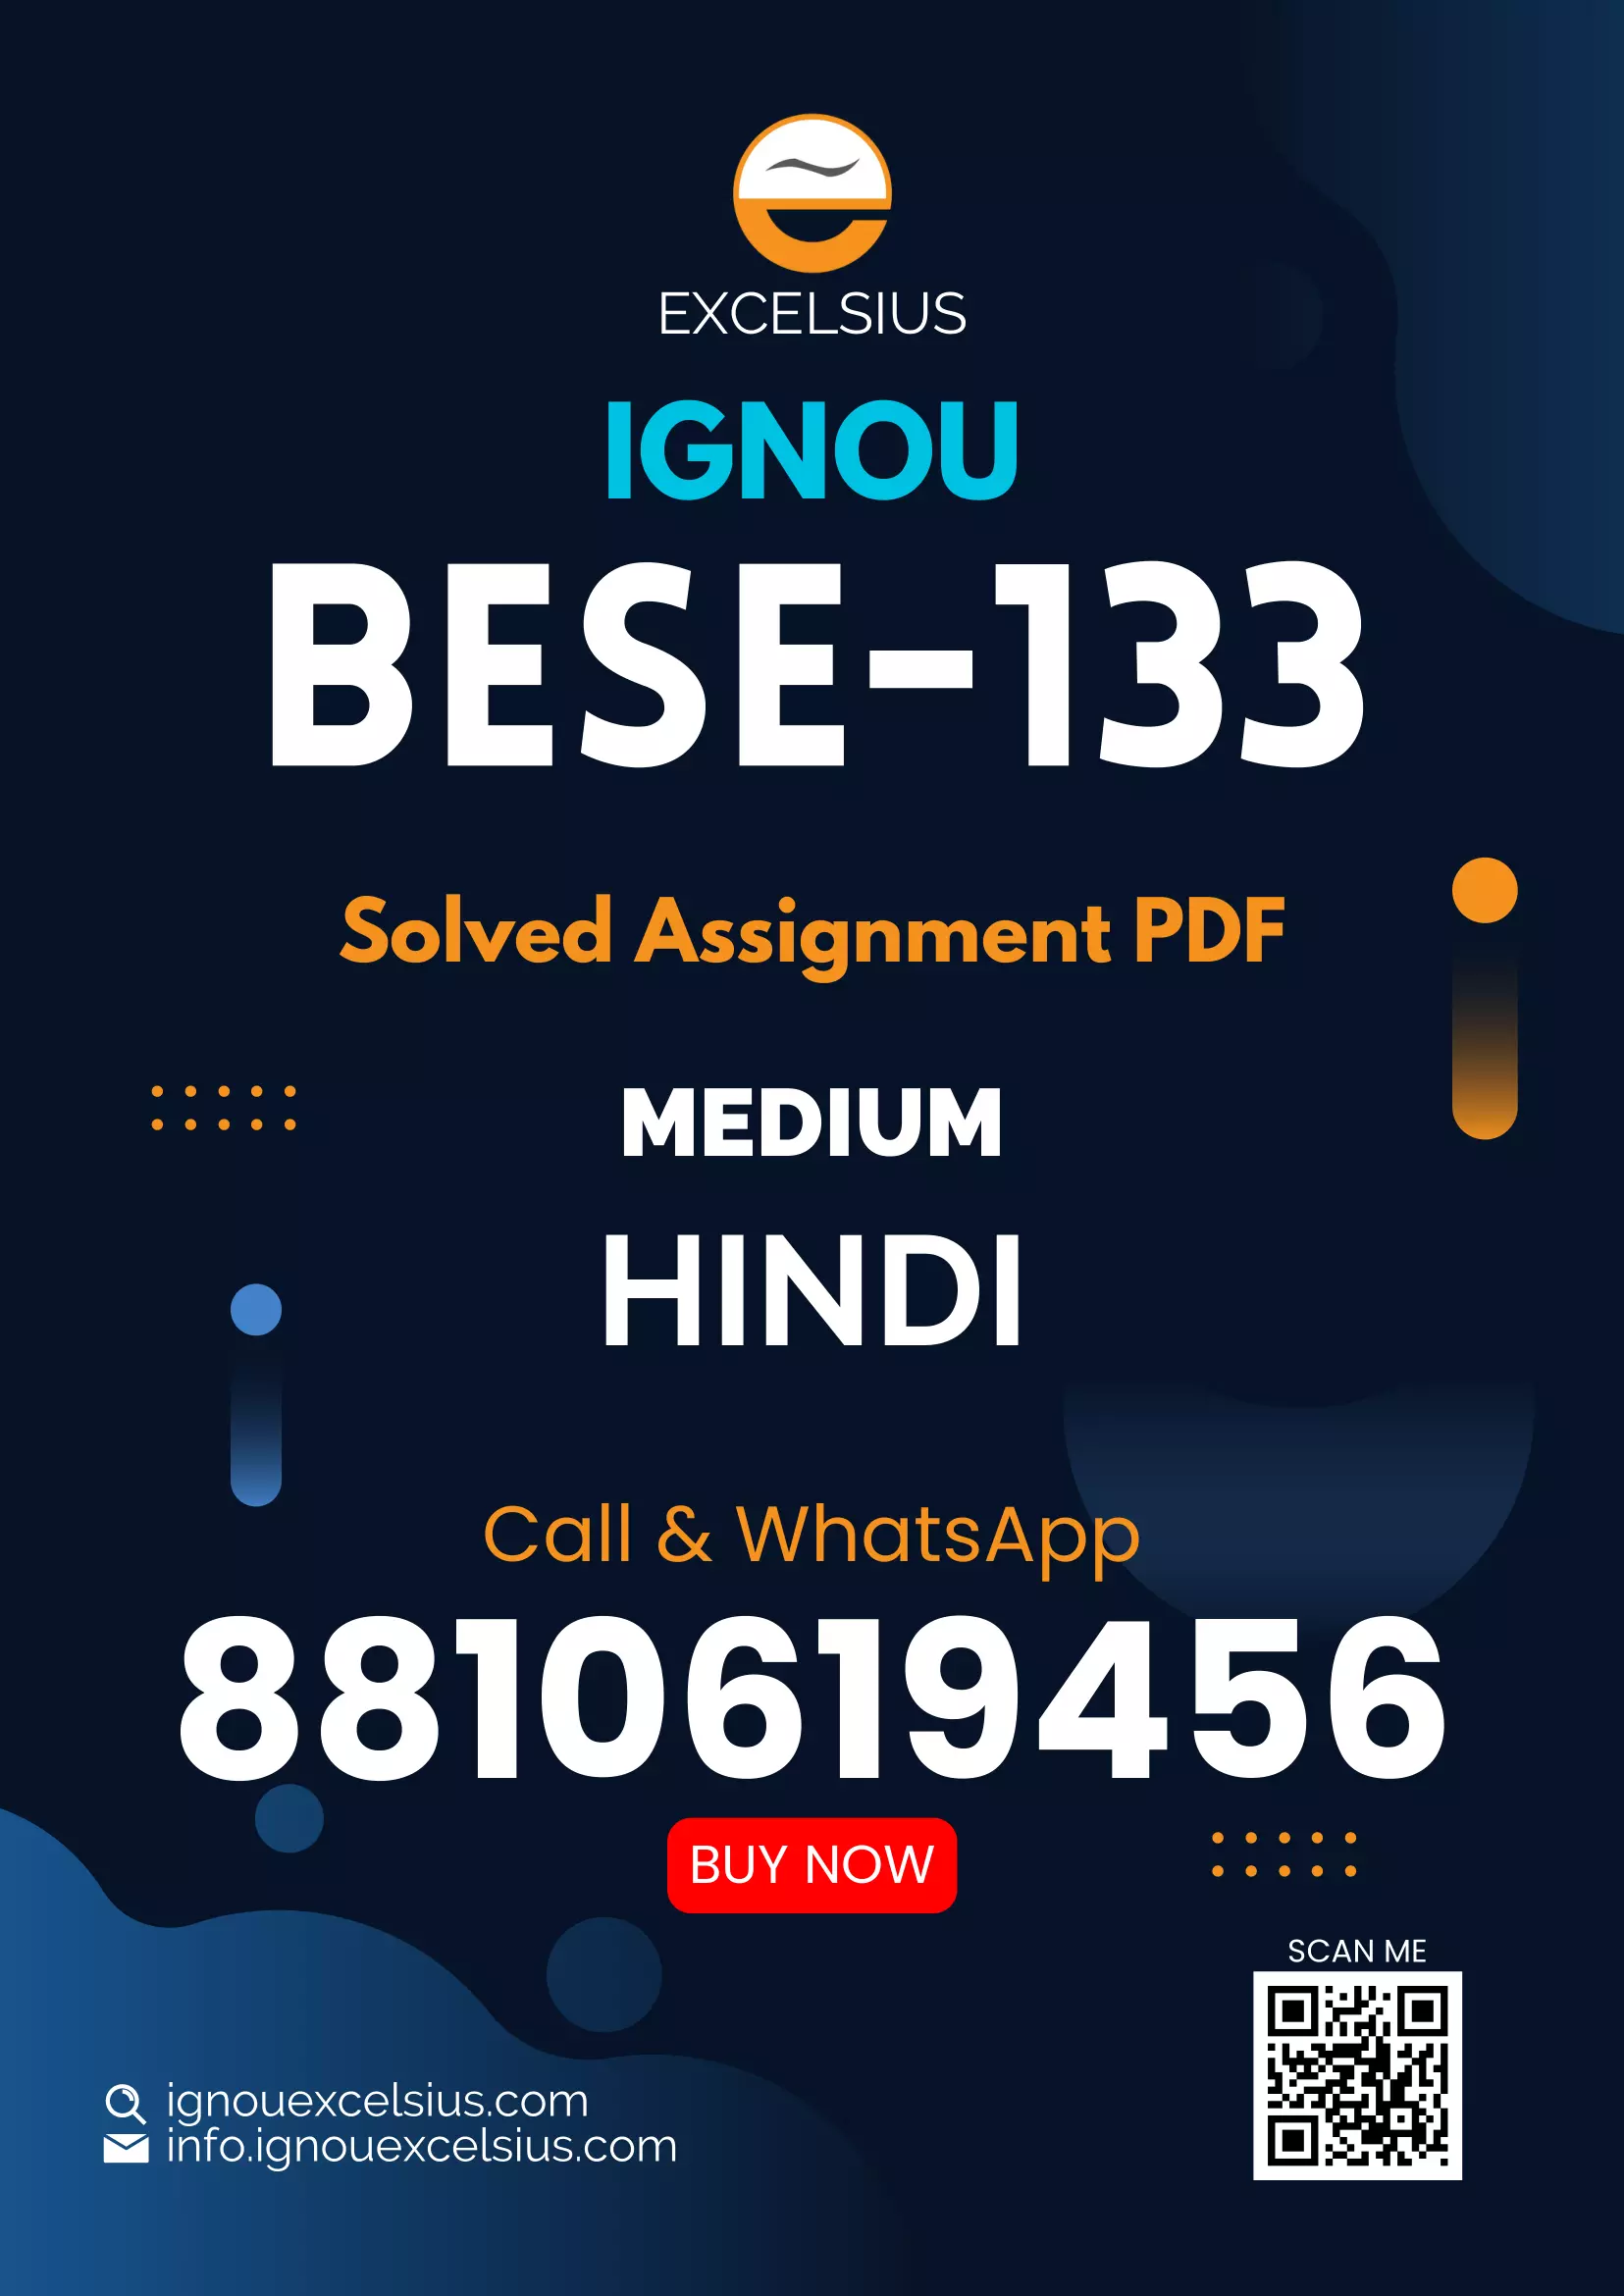 IGNOU BESE-133 - Adolescence and Family Education Latest Solved Assignment-January 2022